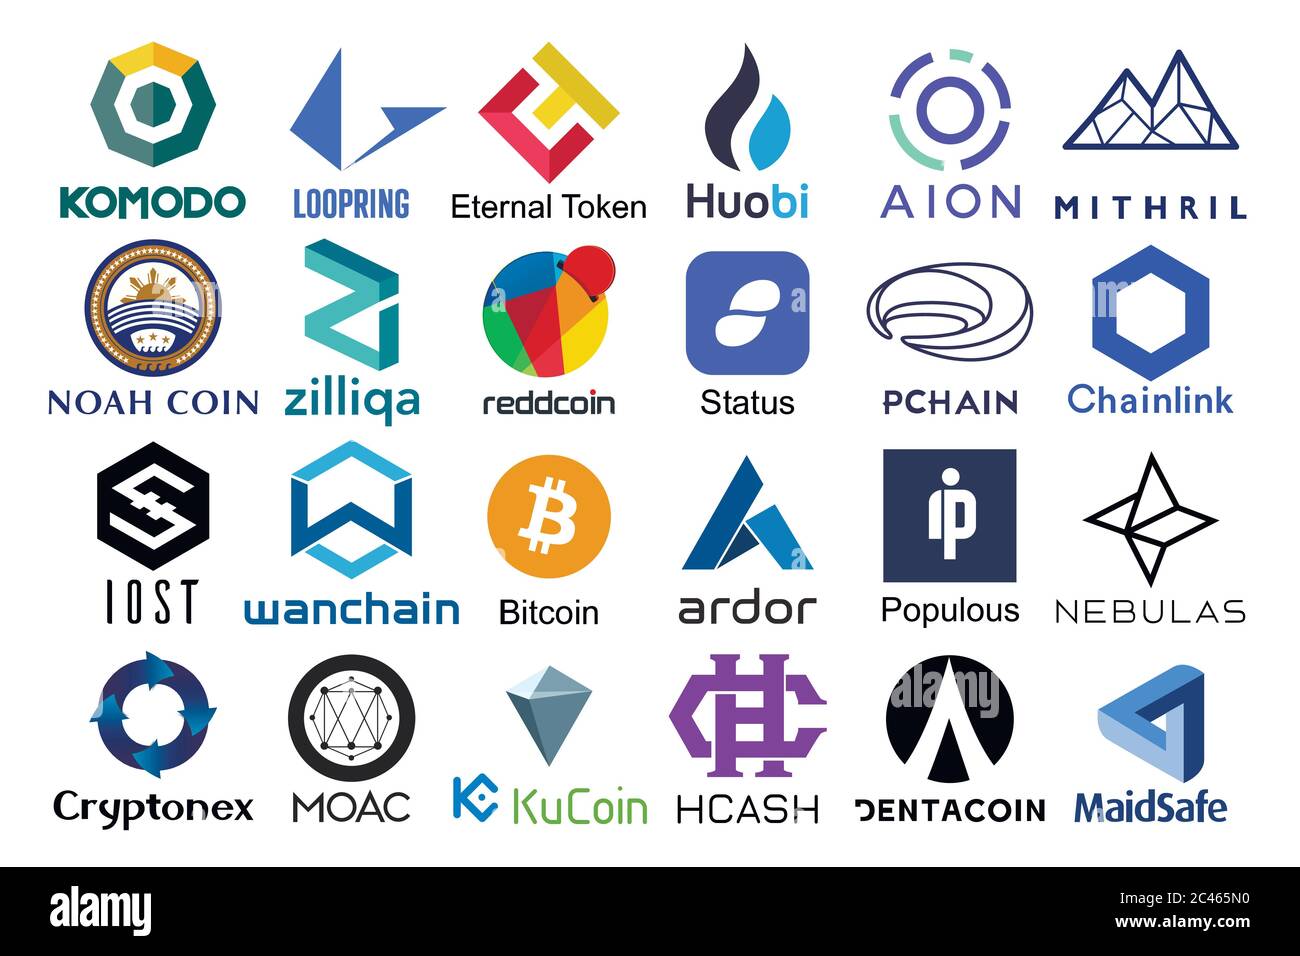 Set of logos popular cryptocurrencies with names of it, vector illustration Stock Vector